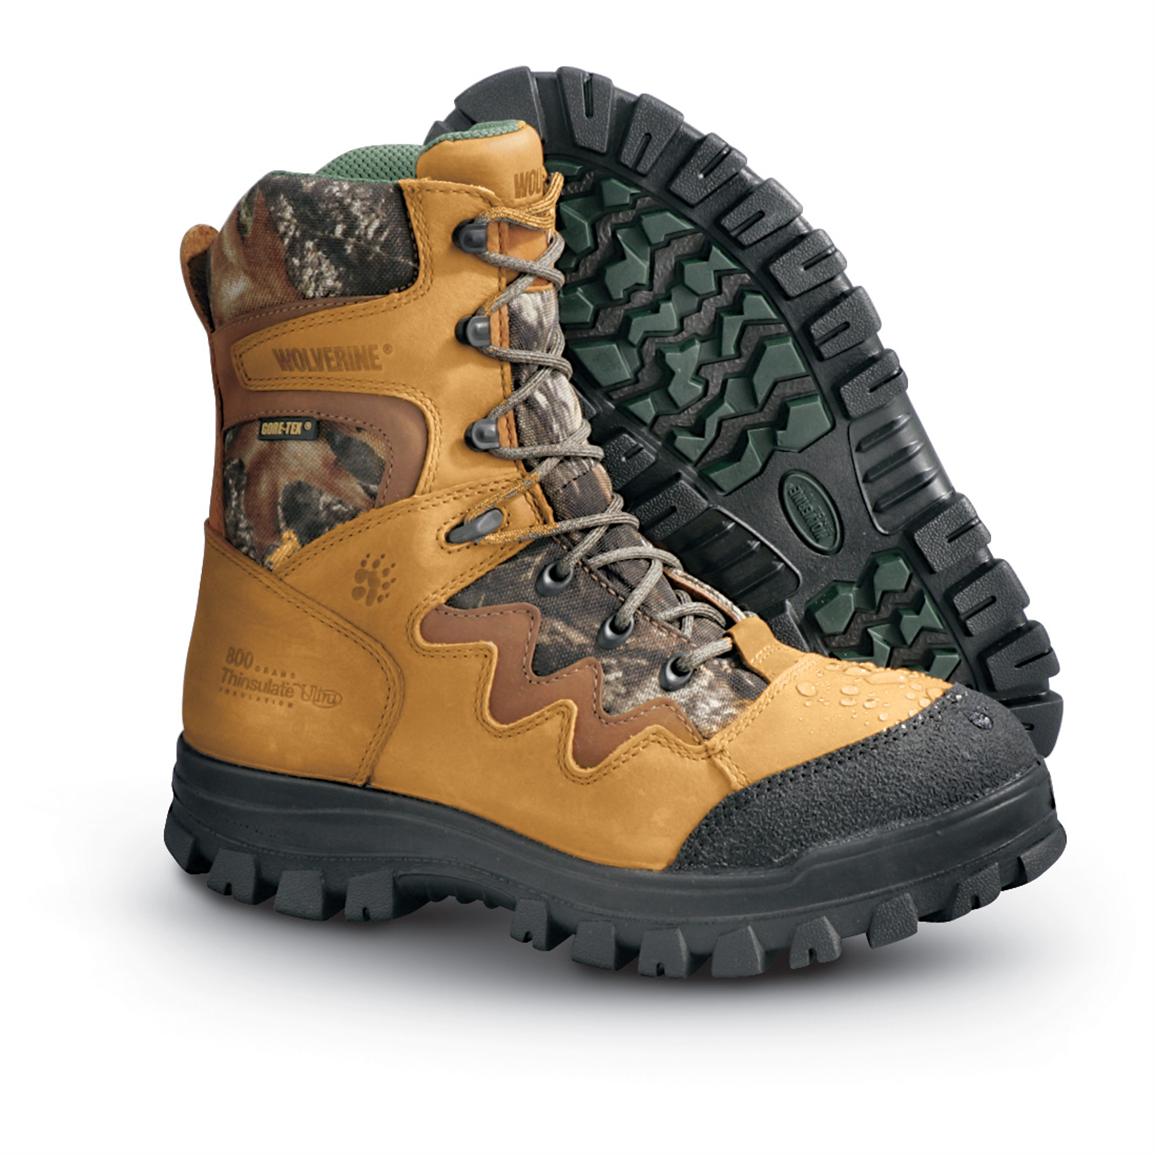 wolverine gore tex hunting boots